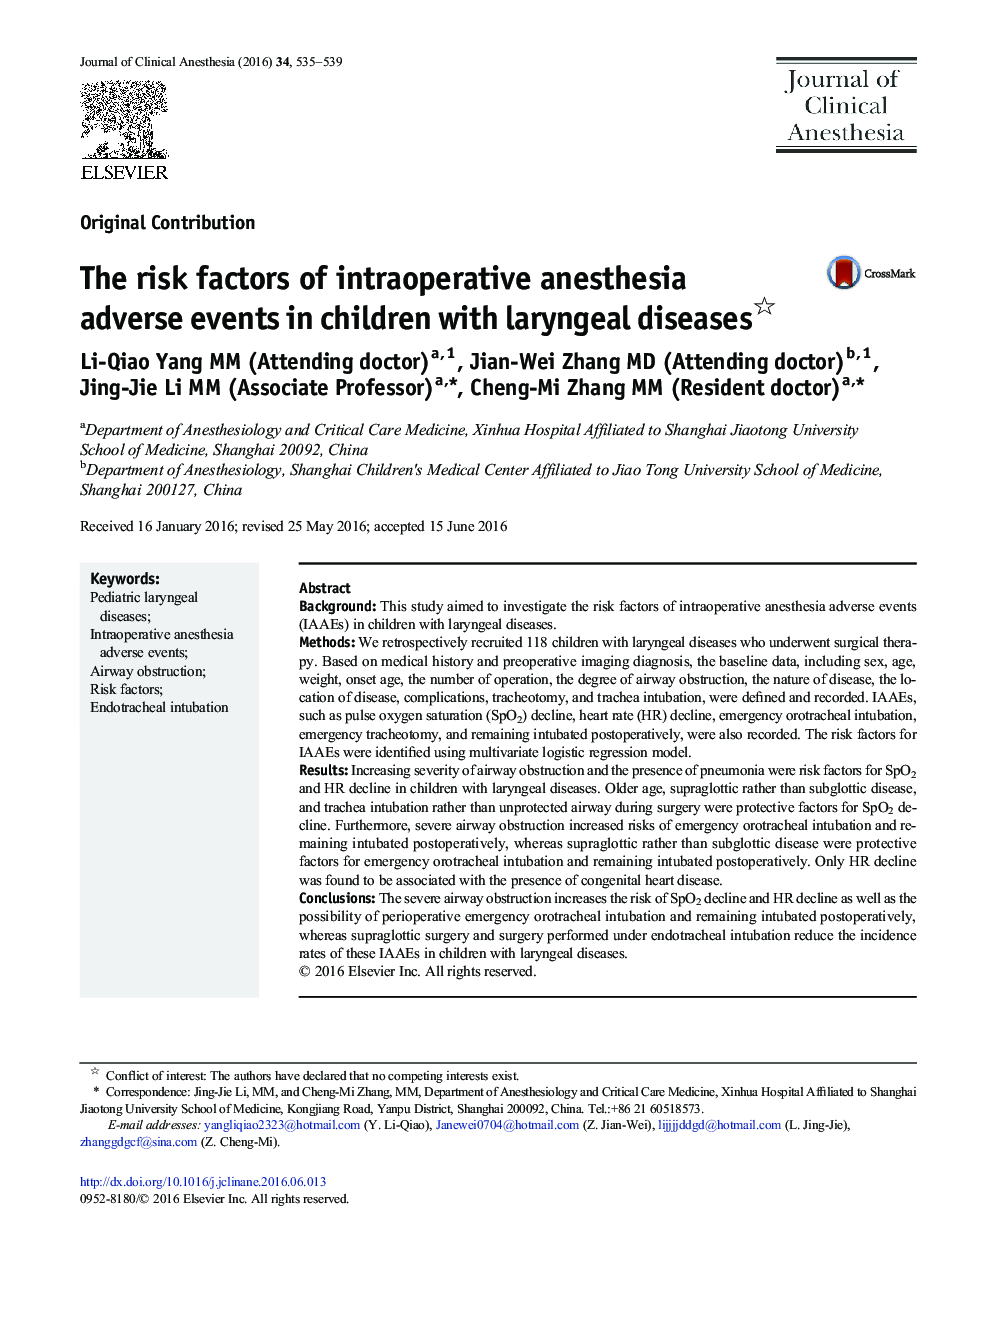 Original ContributionThe risk factors of intraoperative anesthesia adverse events in children with laryngeal diseases